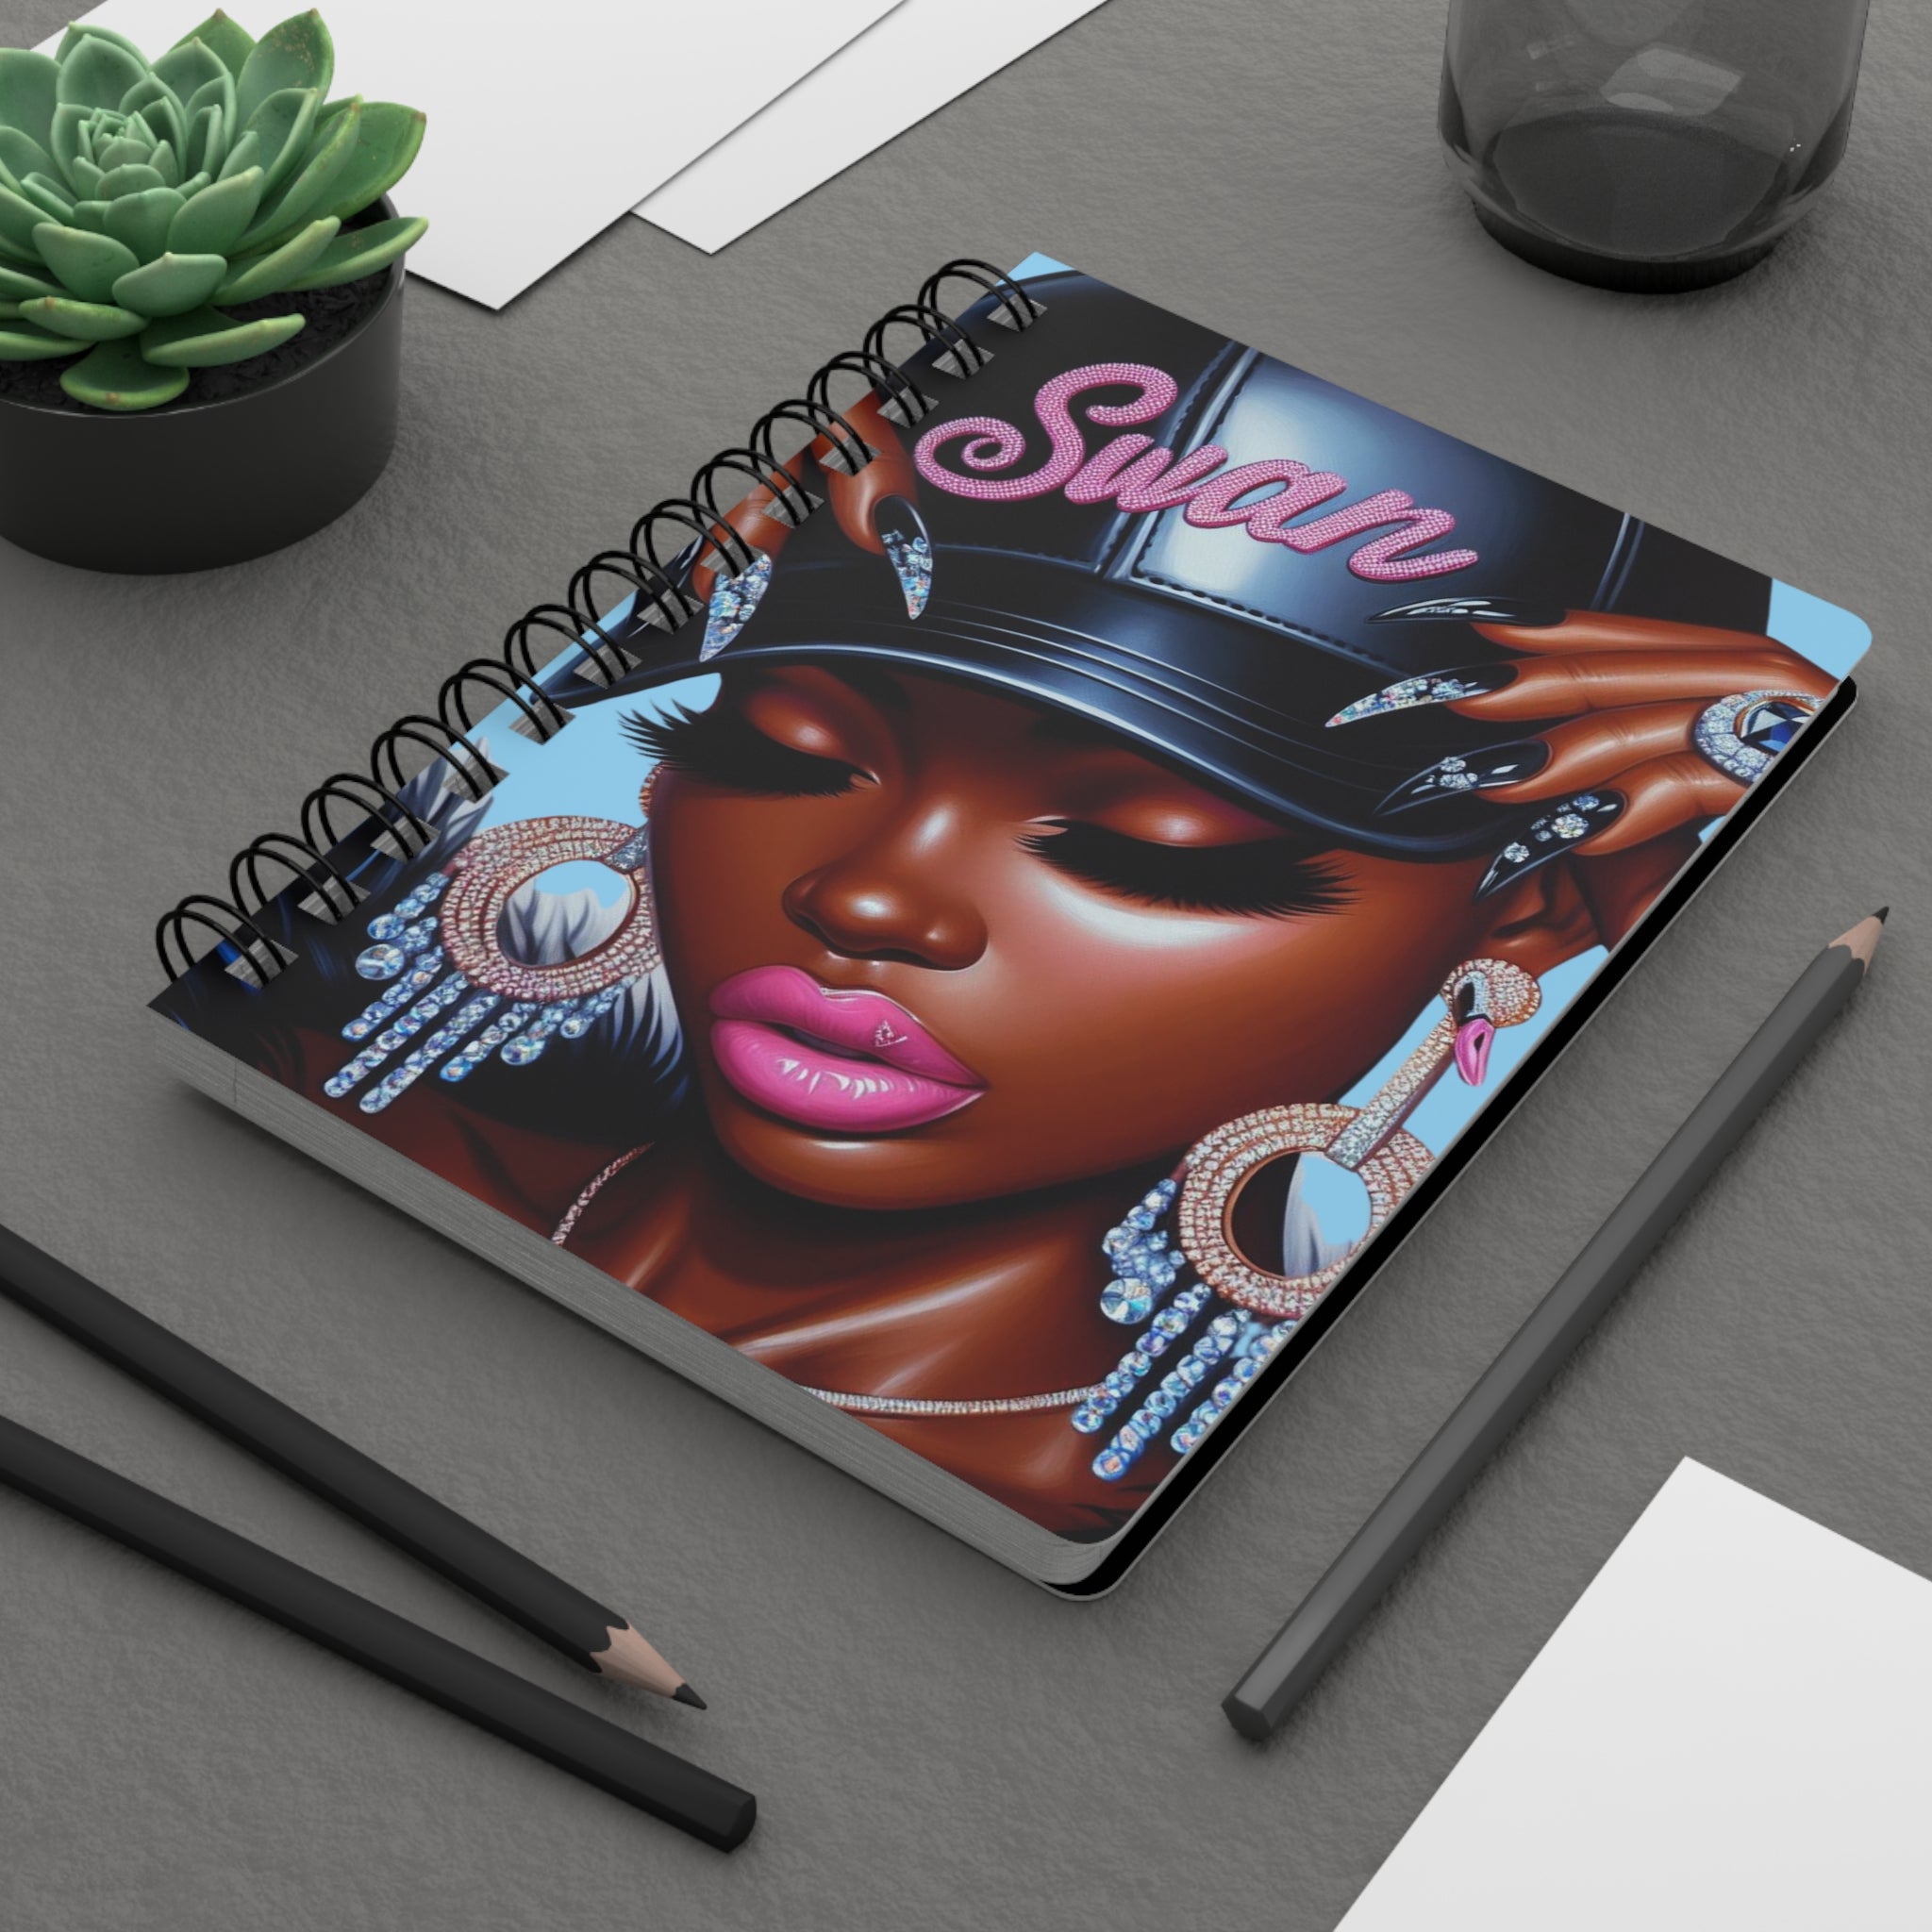 Sigma Beta Xi | She Shimmers Spiral Bound Journal